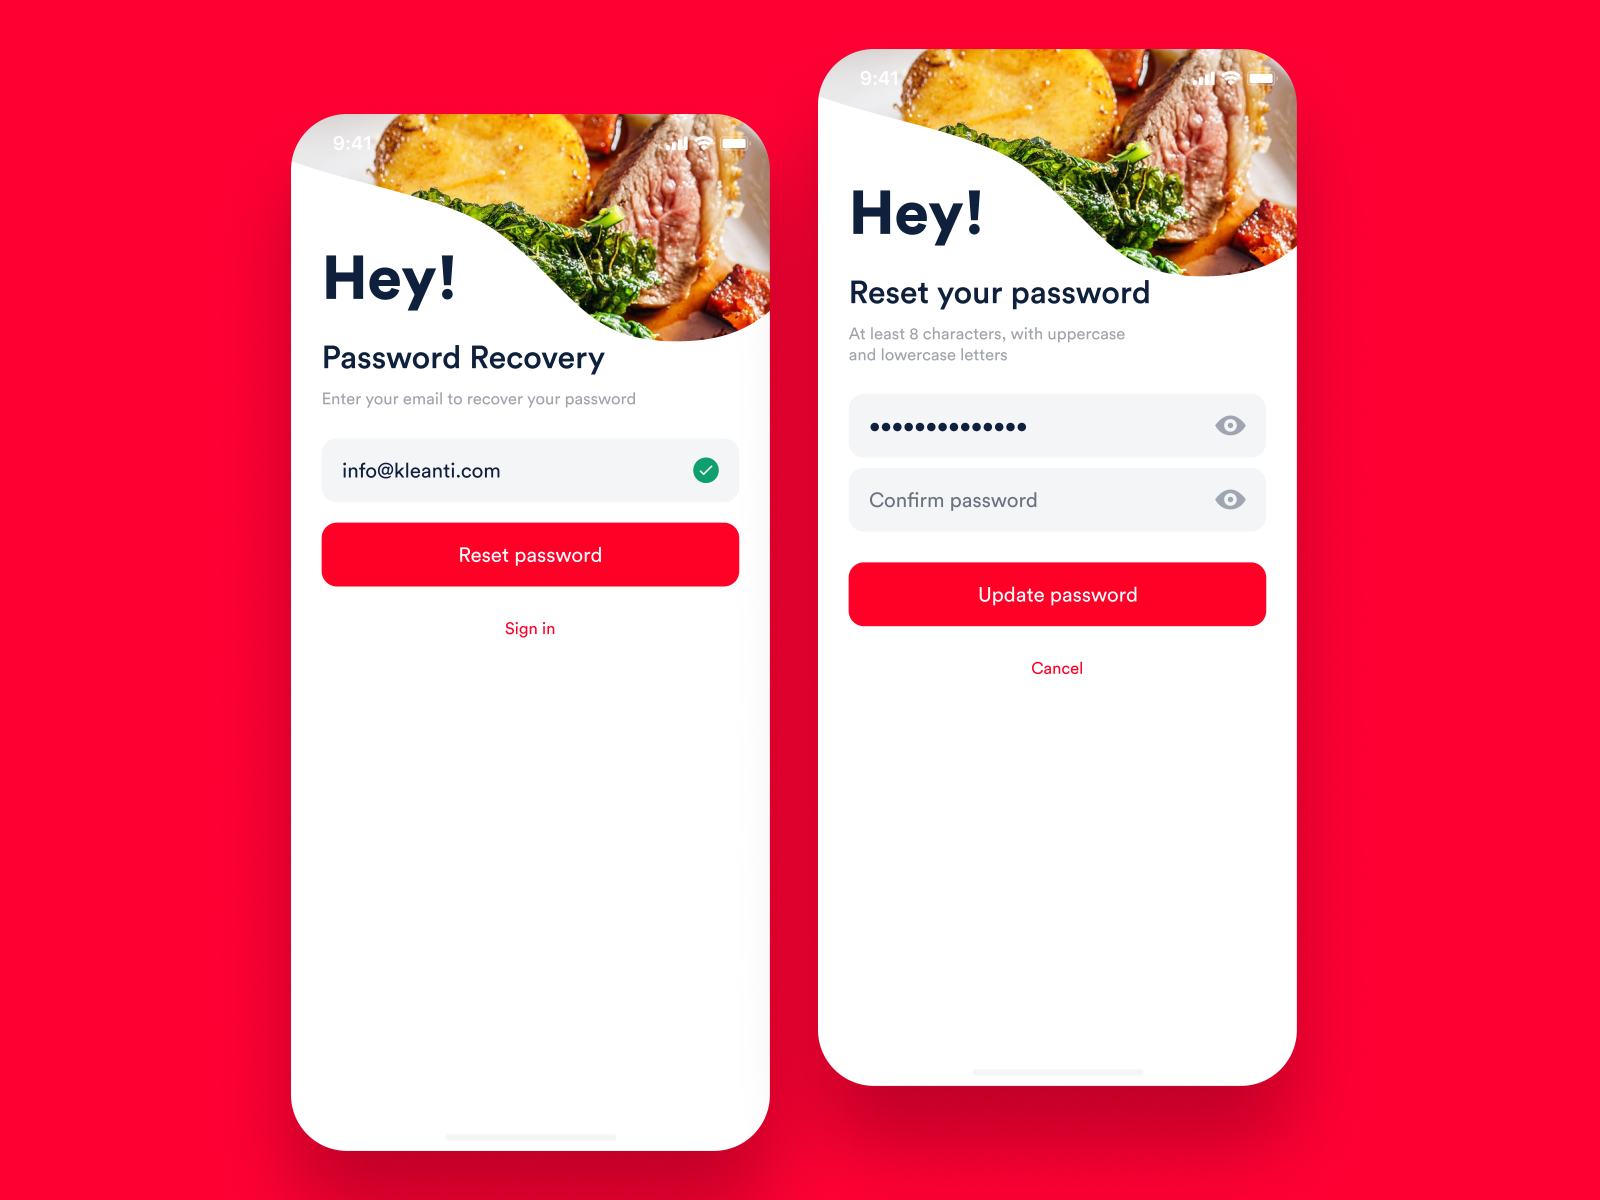 Hey! Food Delivery App